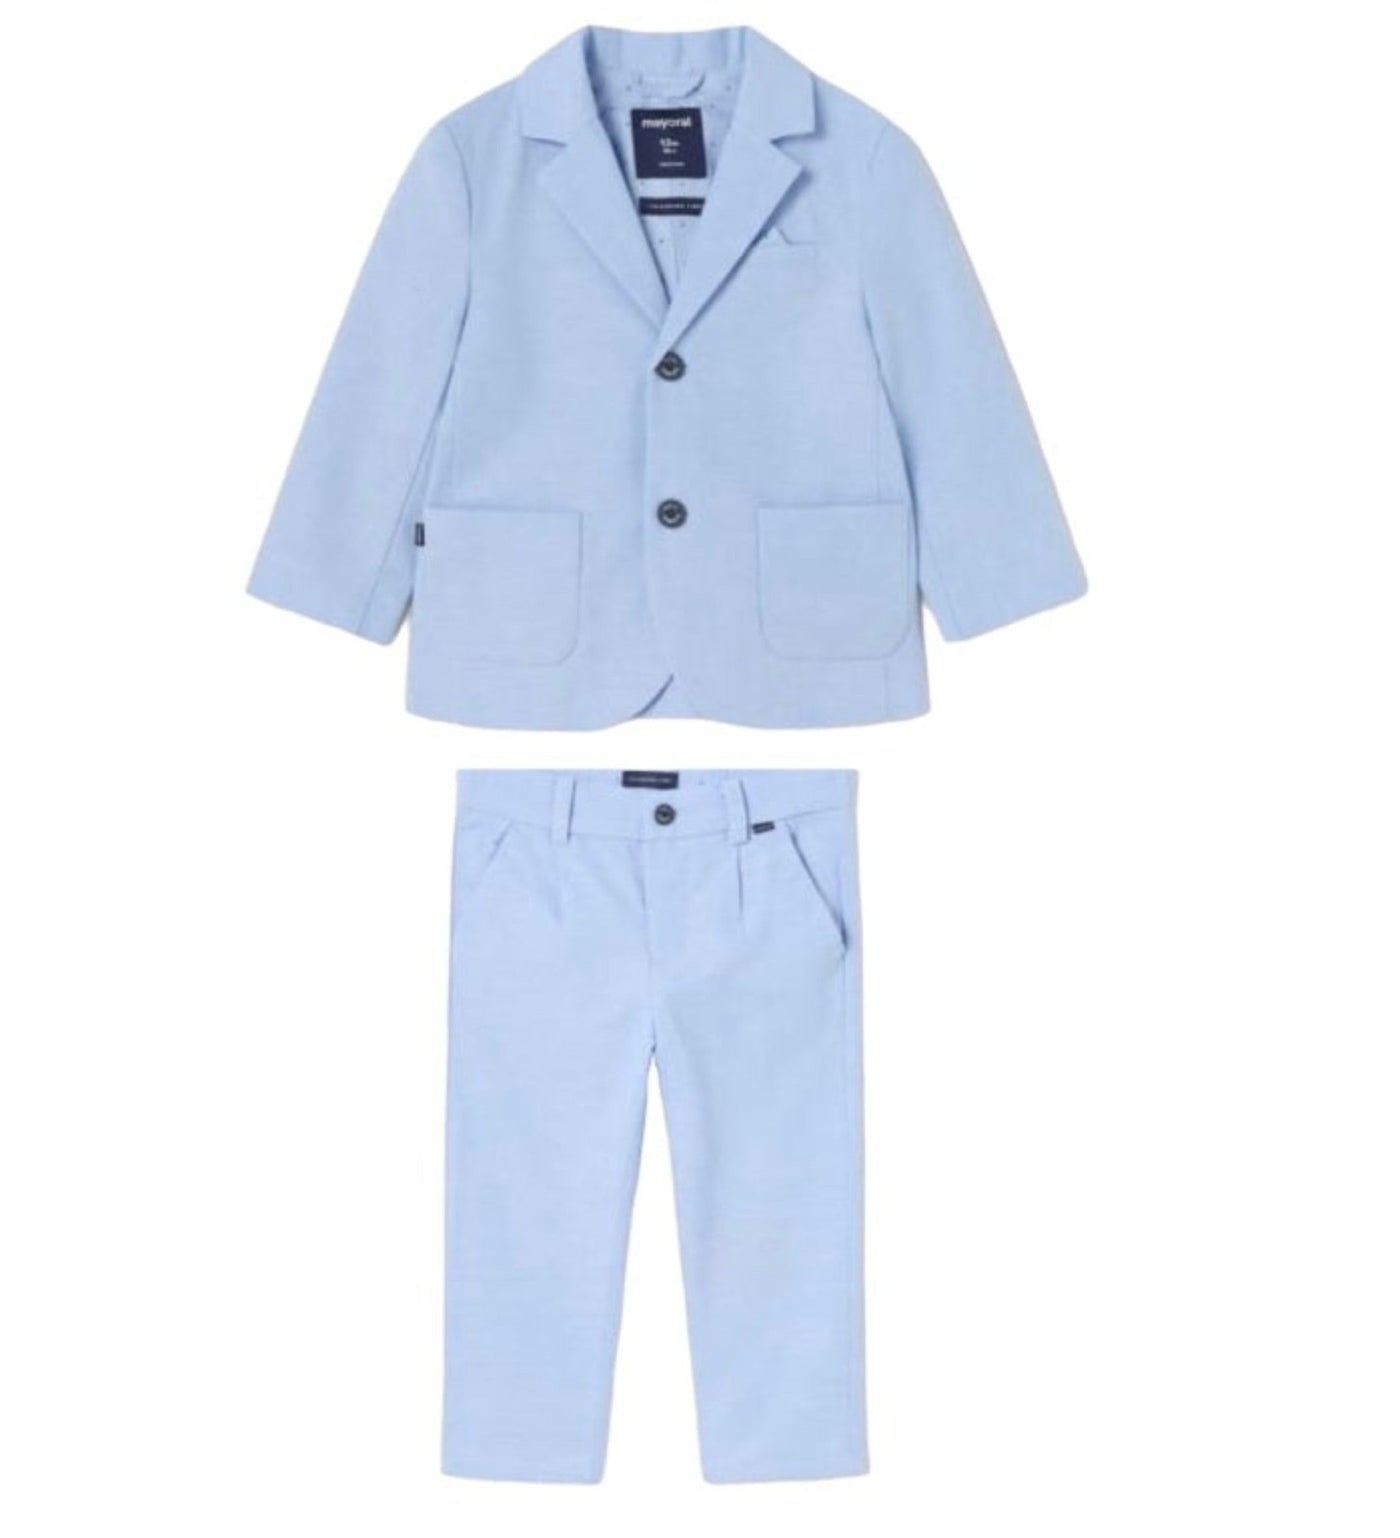 https://www.legalleeblonde.com/2019/03/baby-blue-pant-suit-for-spring.html  | Blazer outfits for women, Baby blue pants, Light blue pants